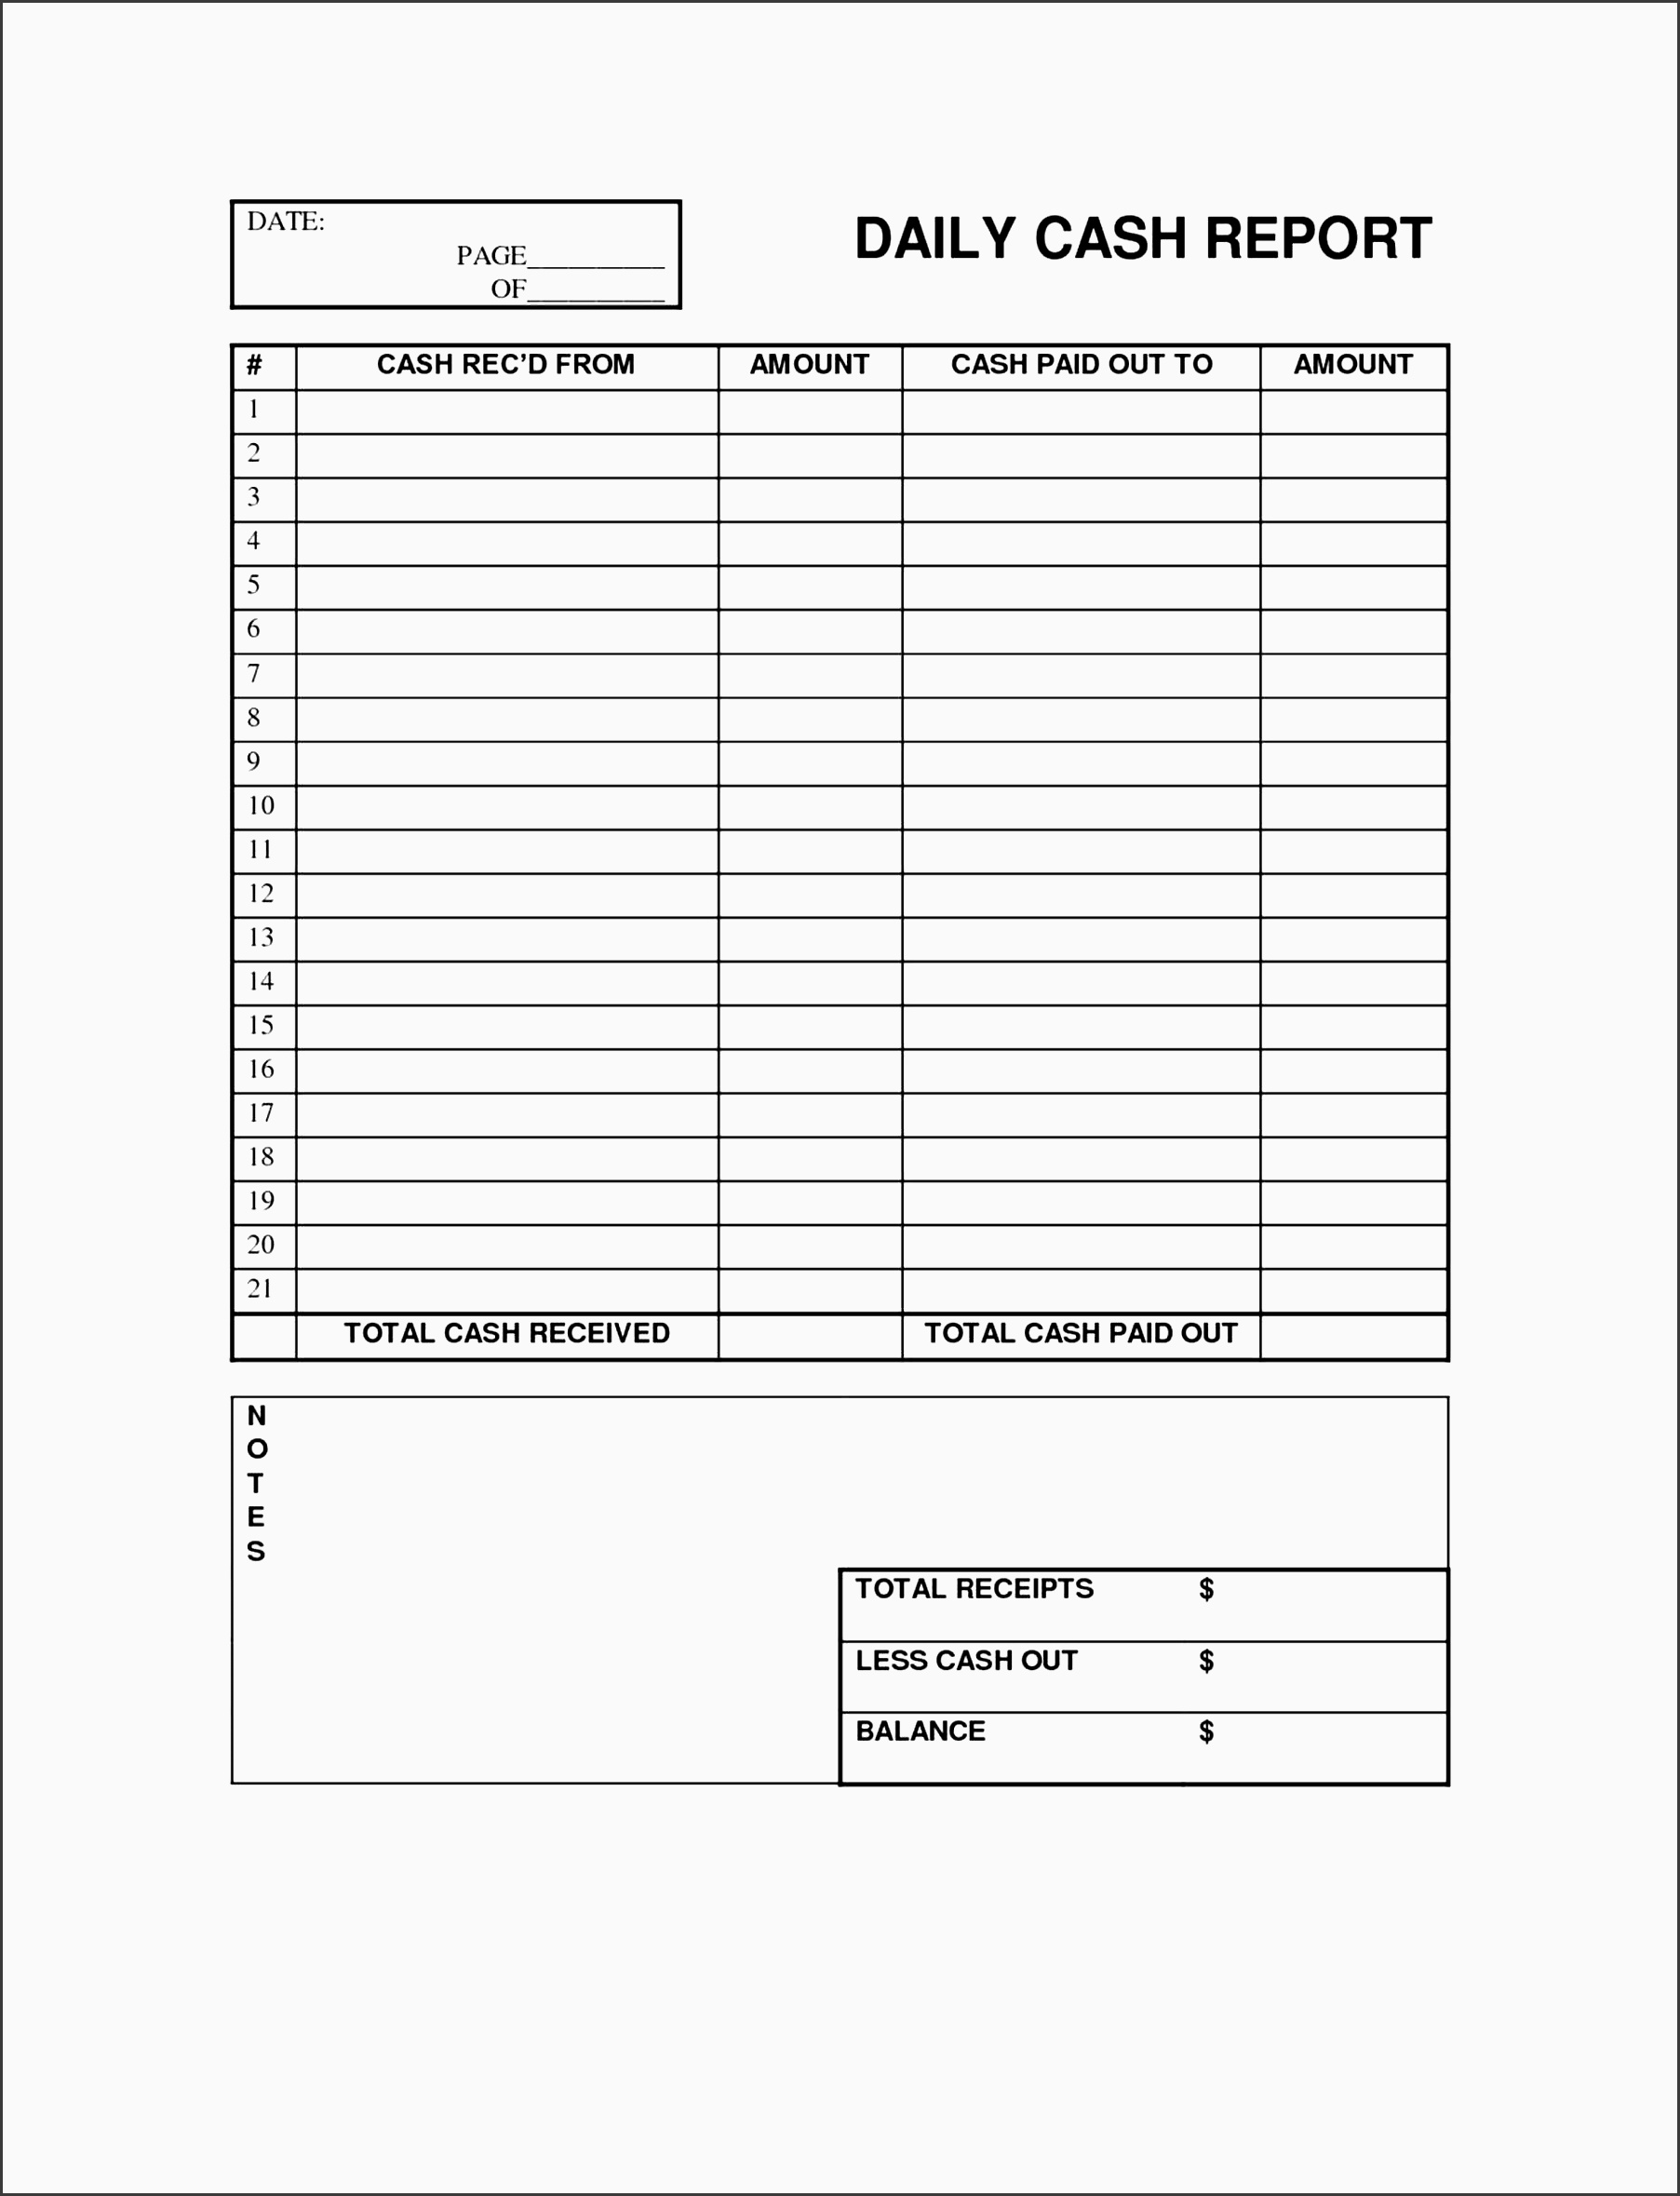 column excel personal balance sheet template action plan word best from family member form best family balance sheet template business sample printable for